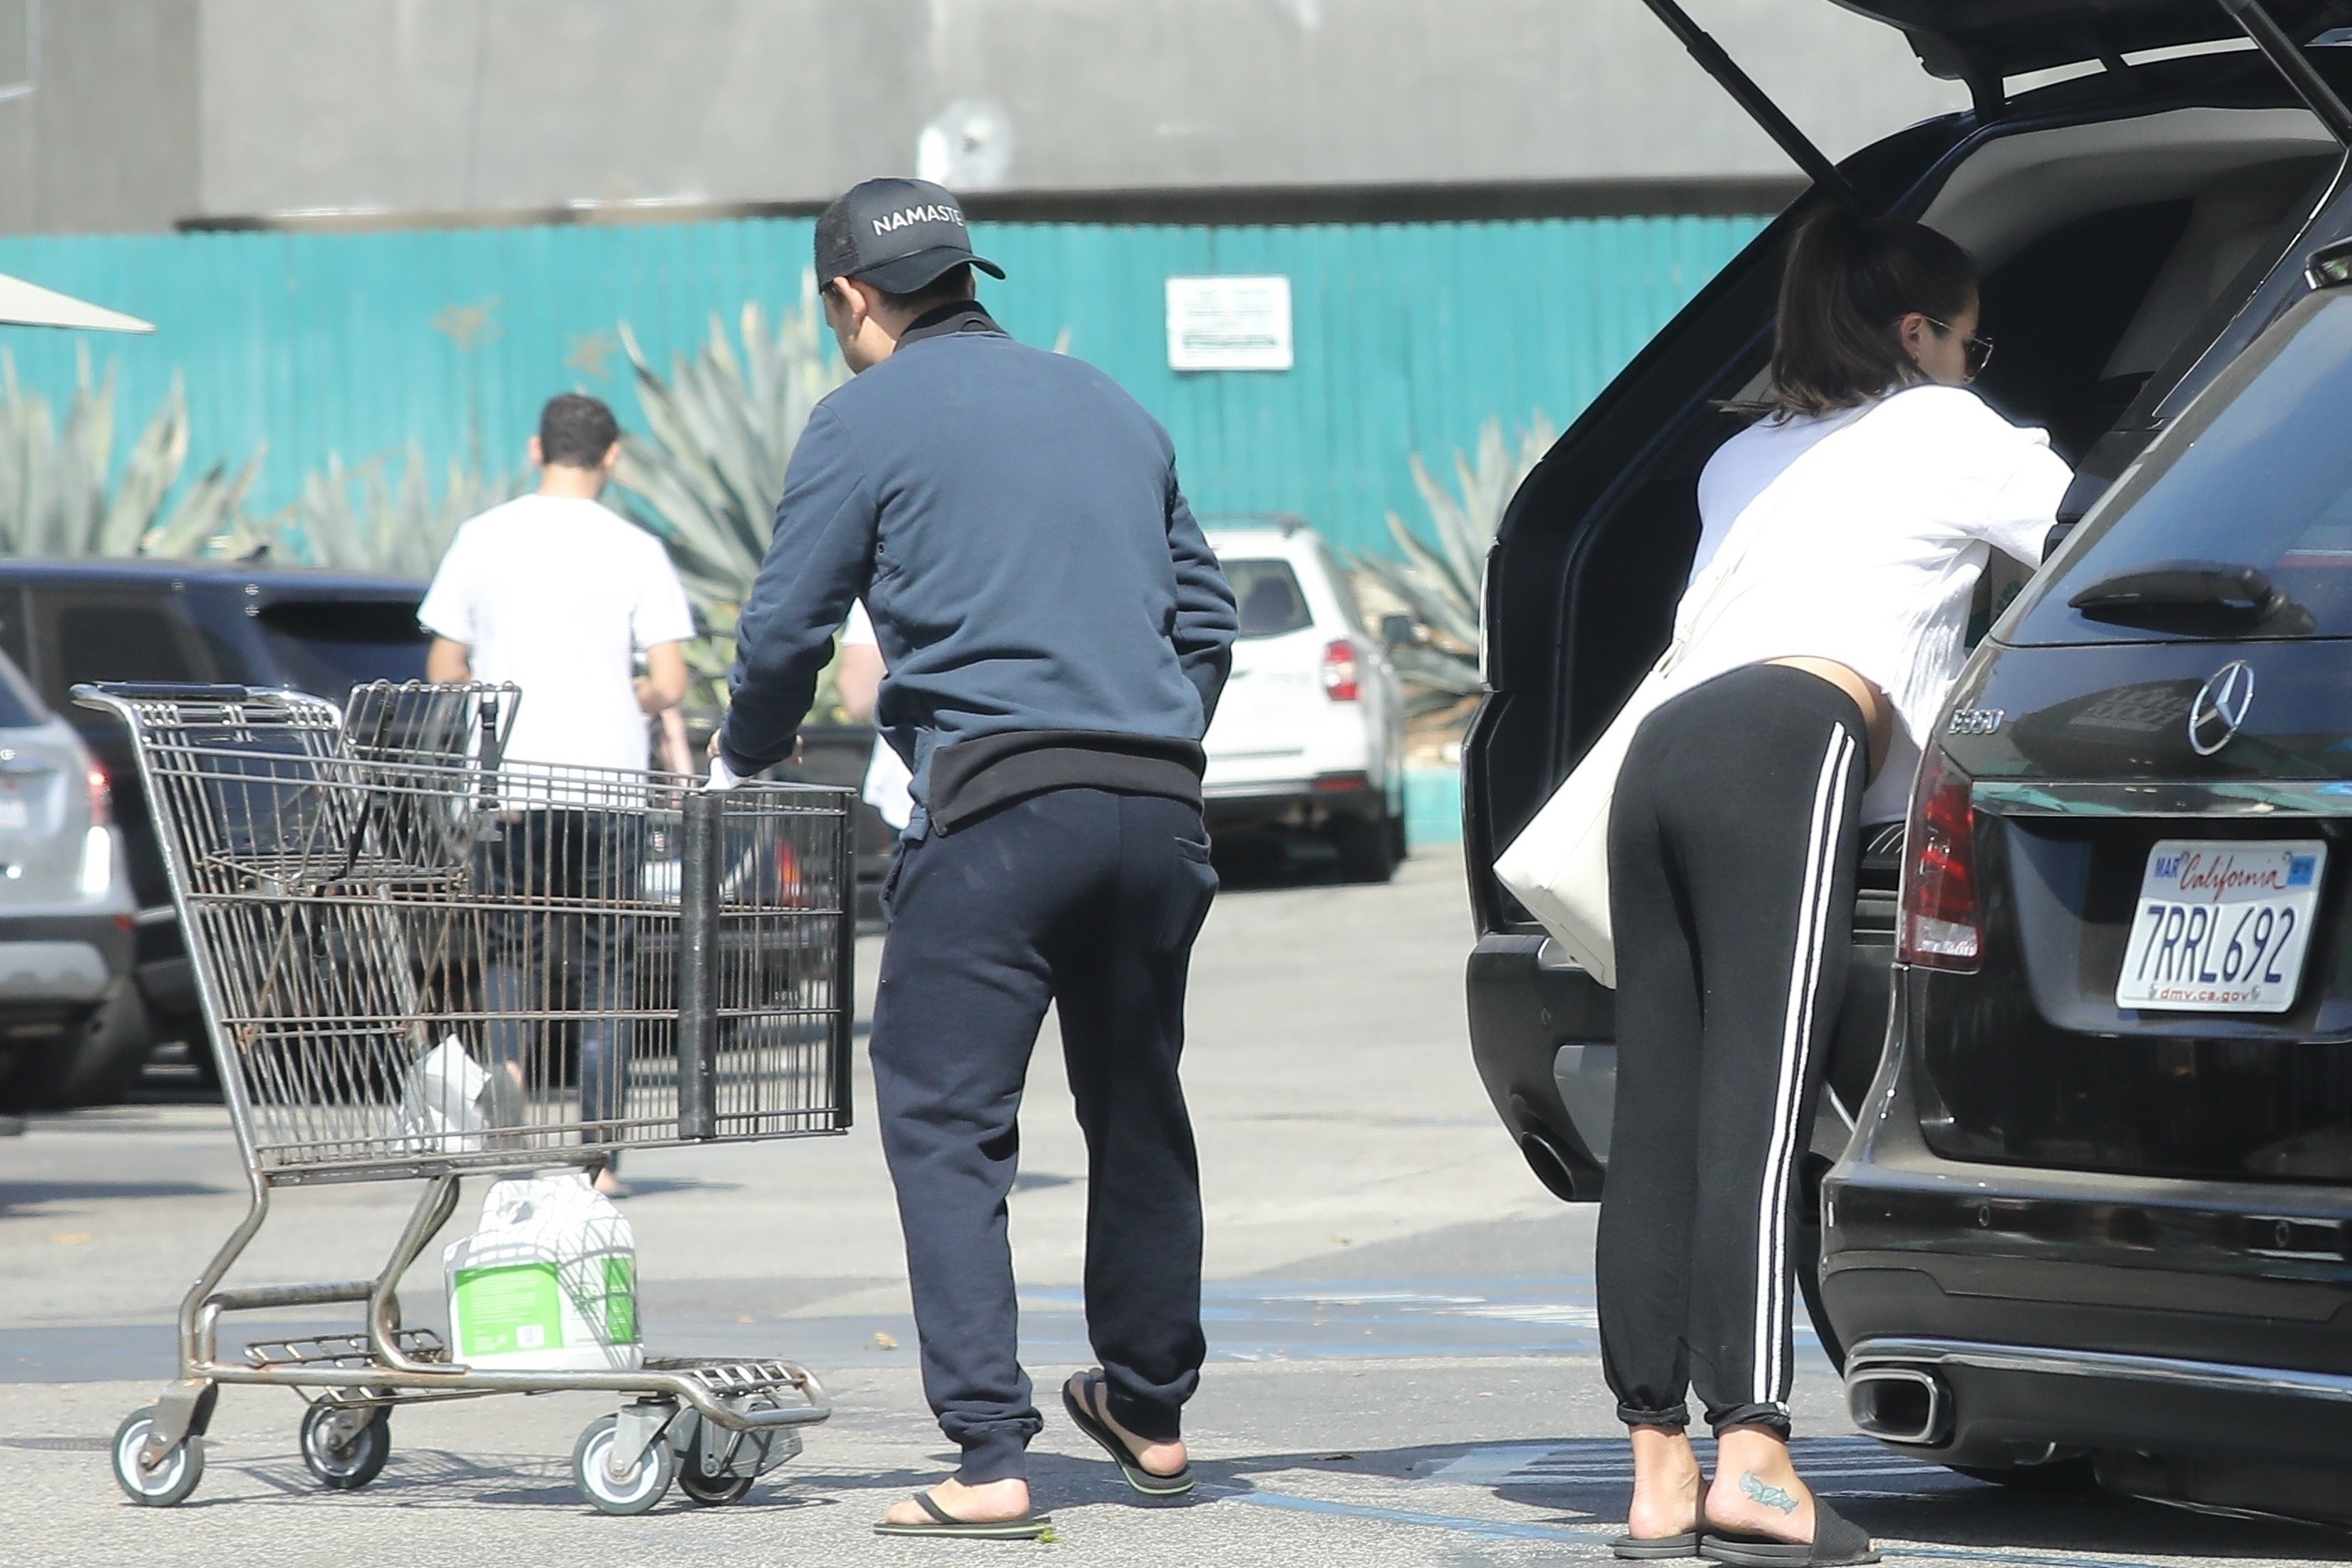 lea-michele-at-whole-foods-with-z-10072018-8.jpg